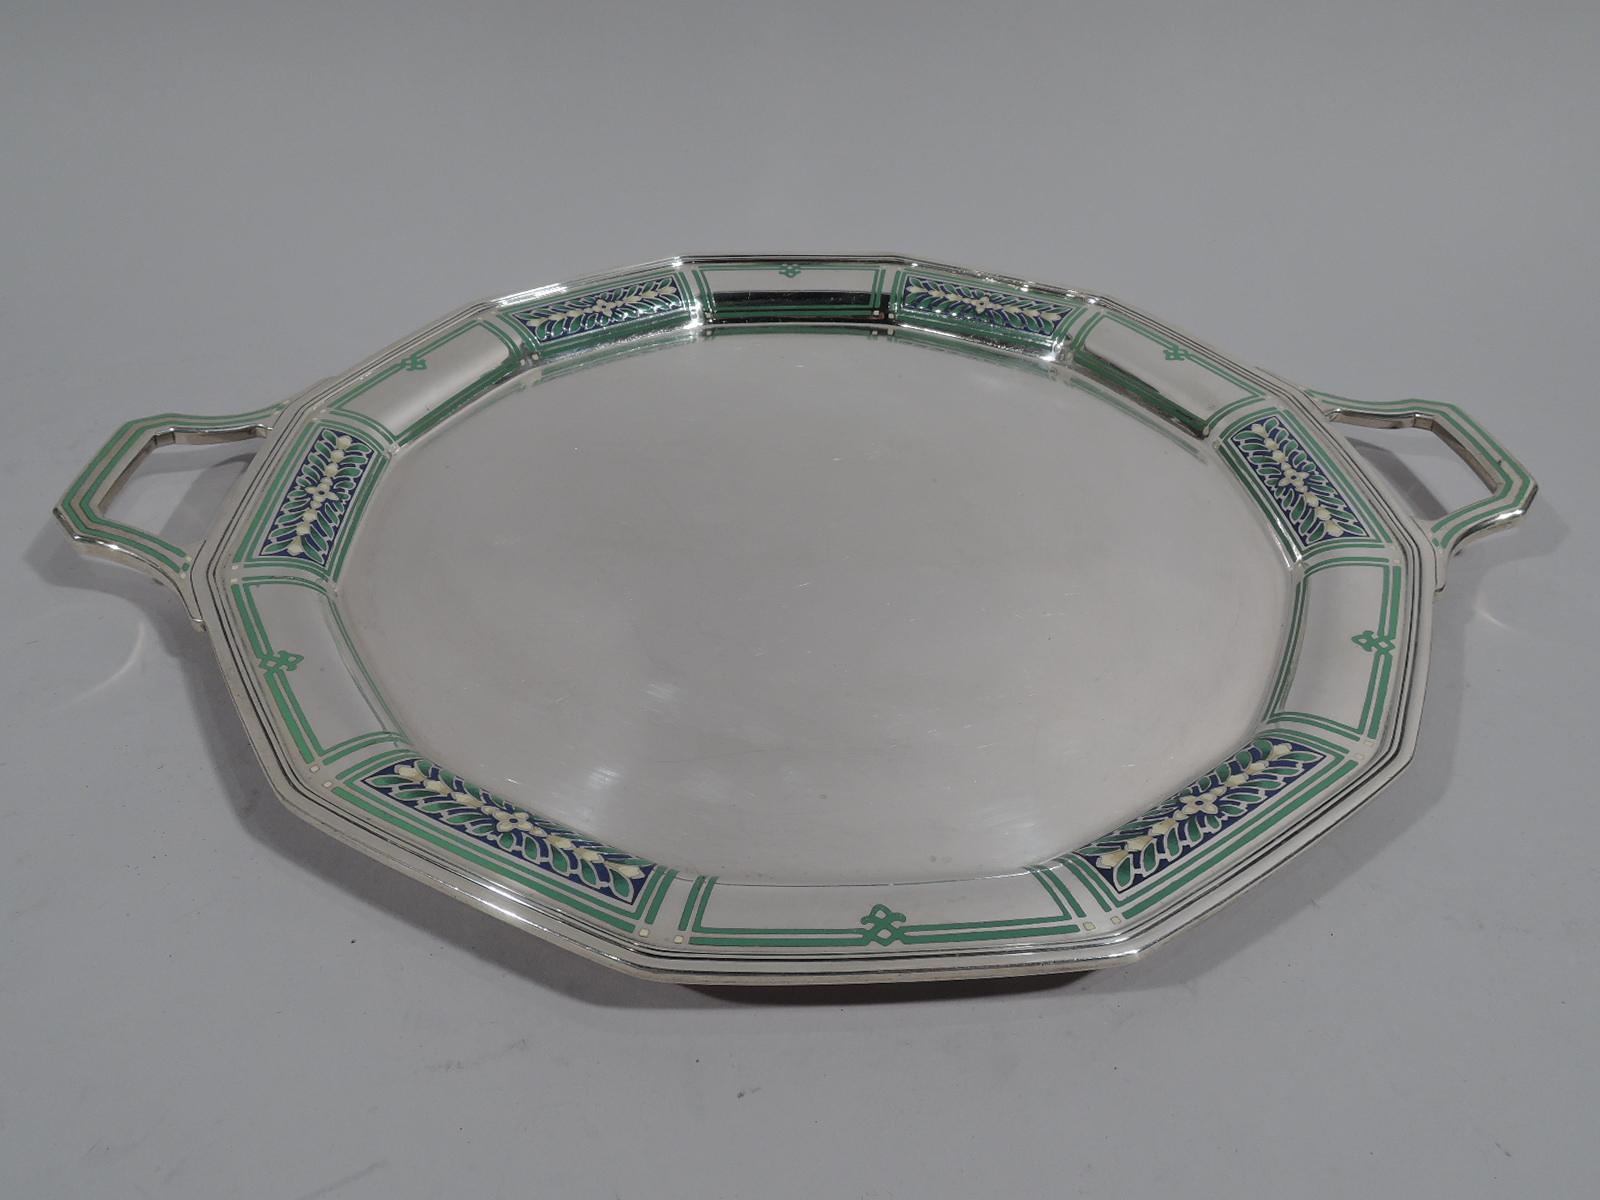 Tiffany Enamel and Sterling Silver Coffee Set on Tray in Art Deco Style 5